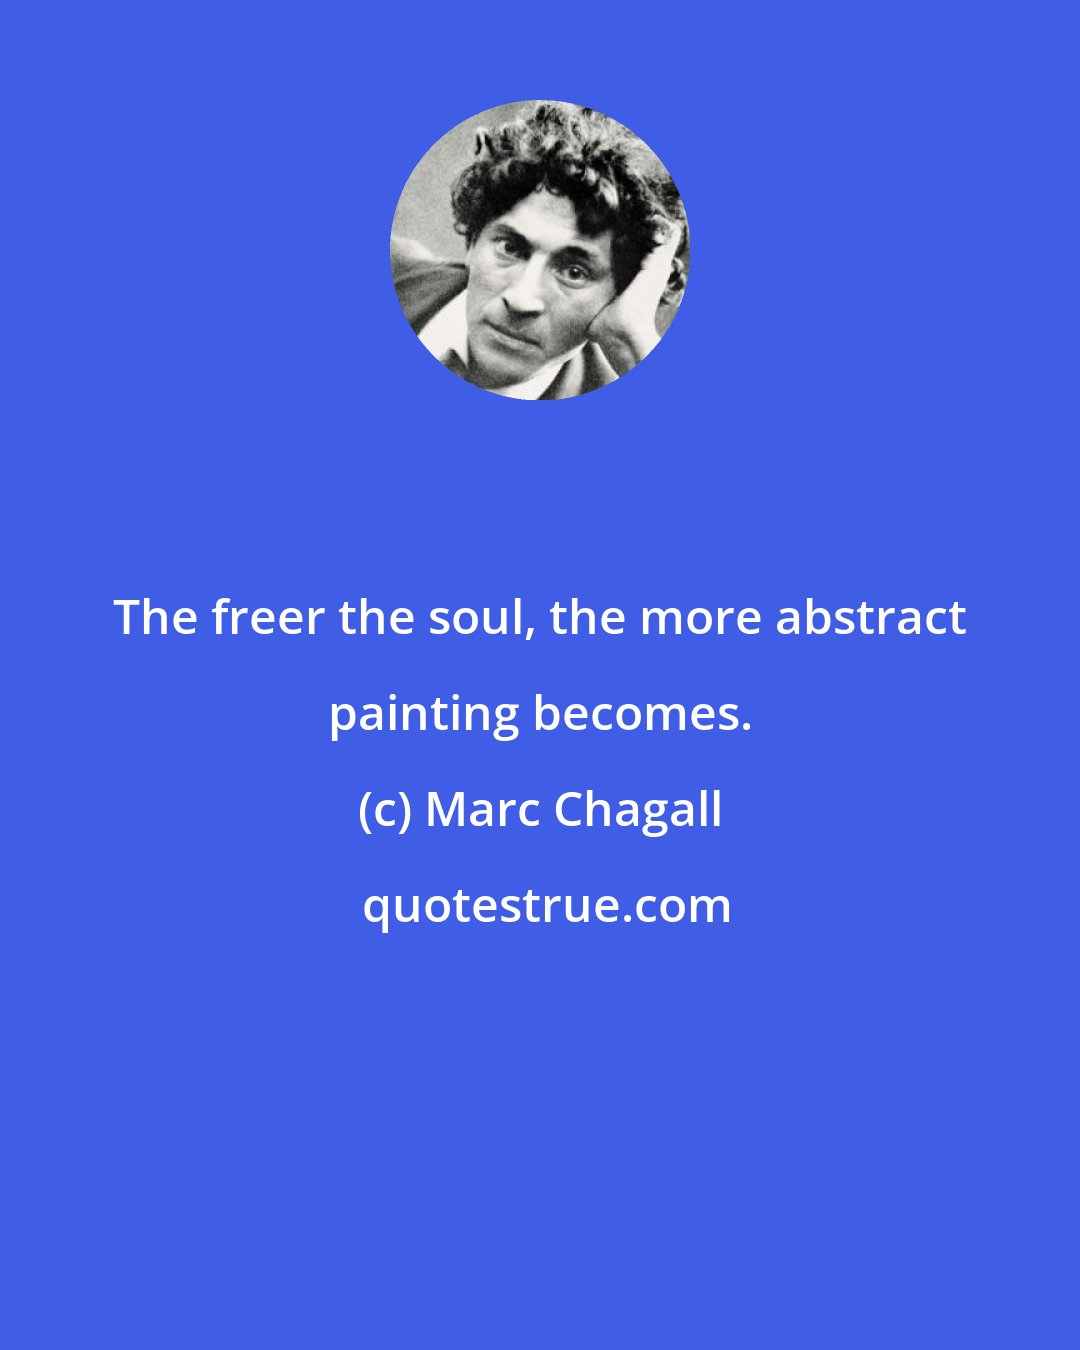 Marc Chagall: The freer the soul, the more abstract painting becomes.